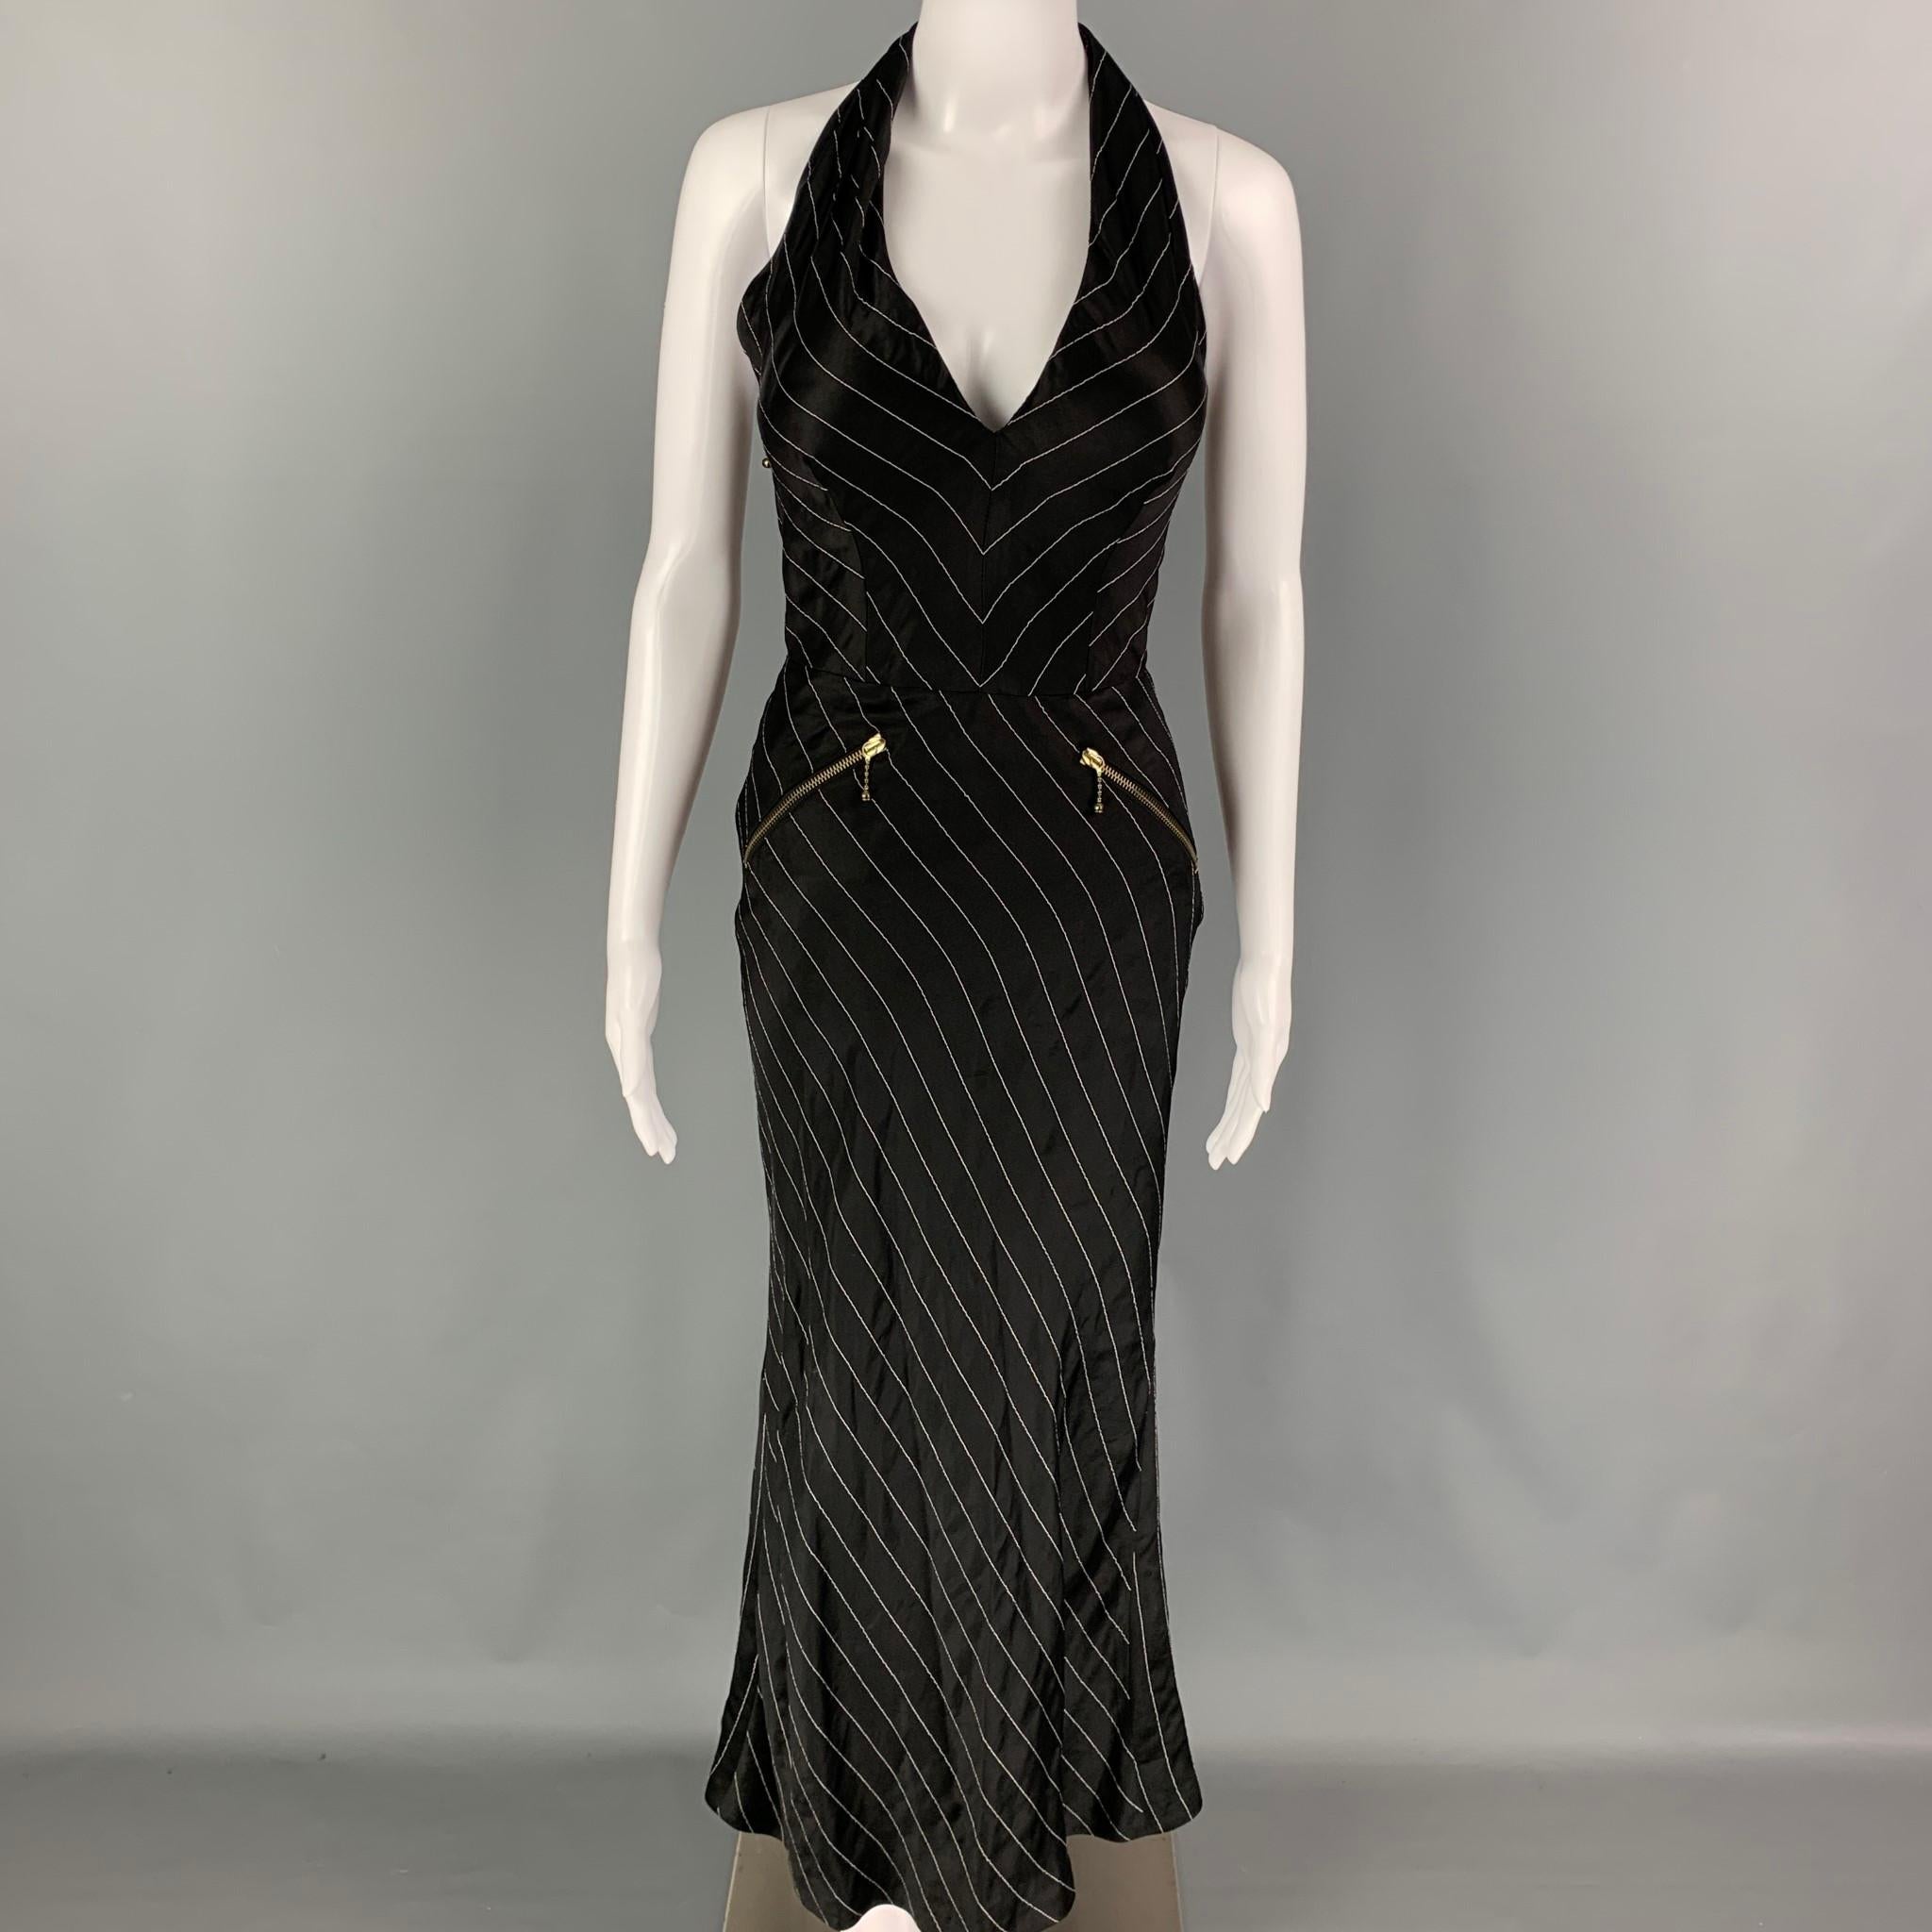 JEAN PAUL GAULTIER SS 1995 dress comes in a black & white pinstripe acetate blend featuring a open back, padded bust, zipper details, and a back zipper closure. Made in Italy. 

Very Good Pre-Owned Condition.
Marked: 40

Measurements:

Bust: 28